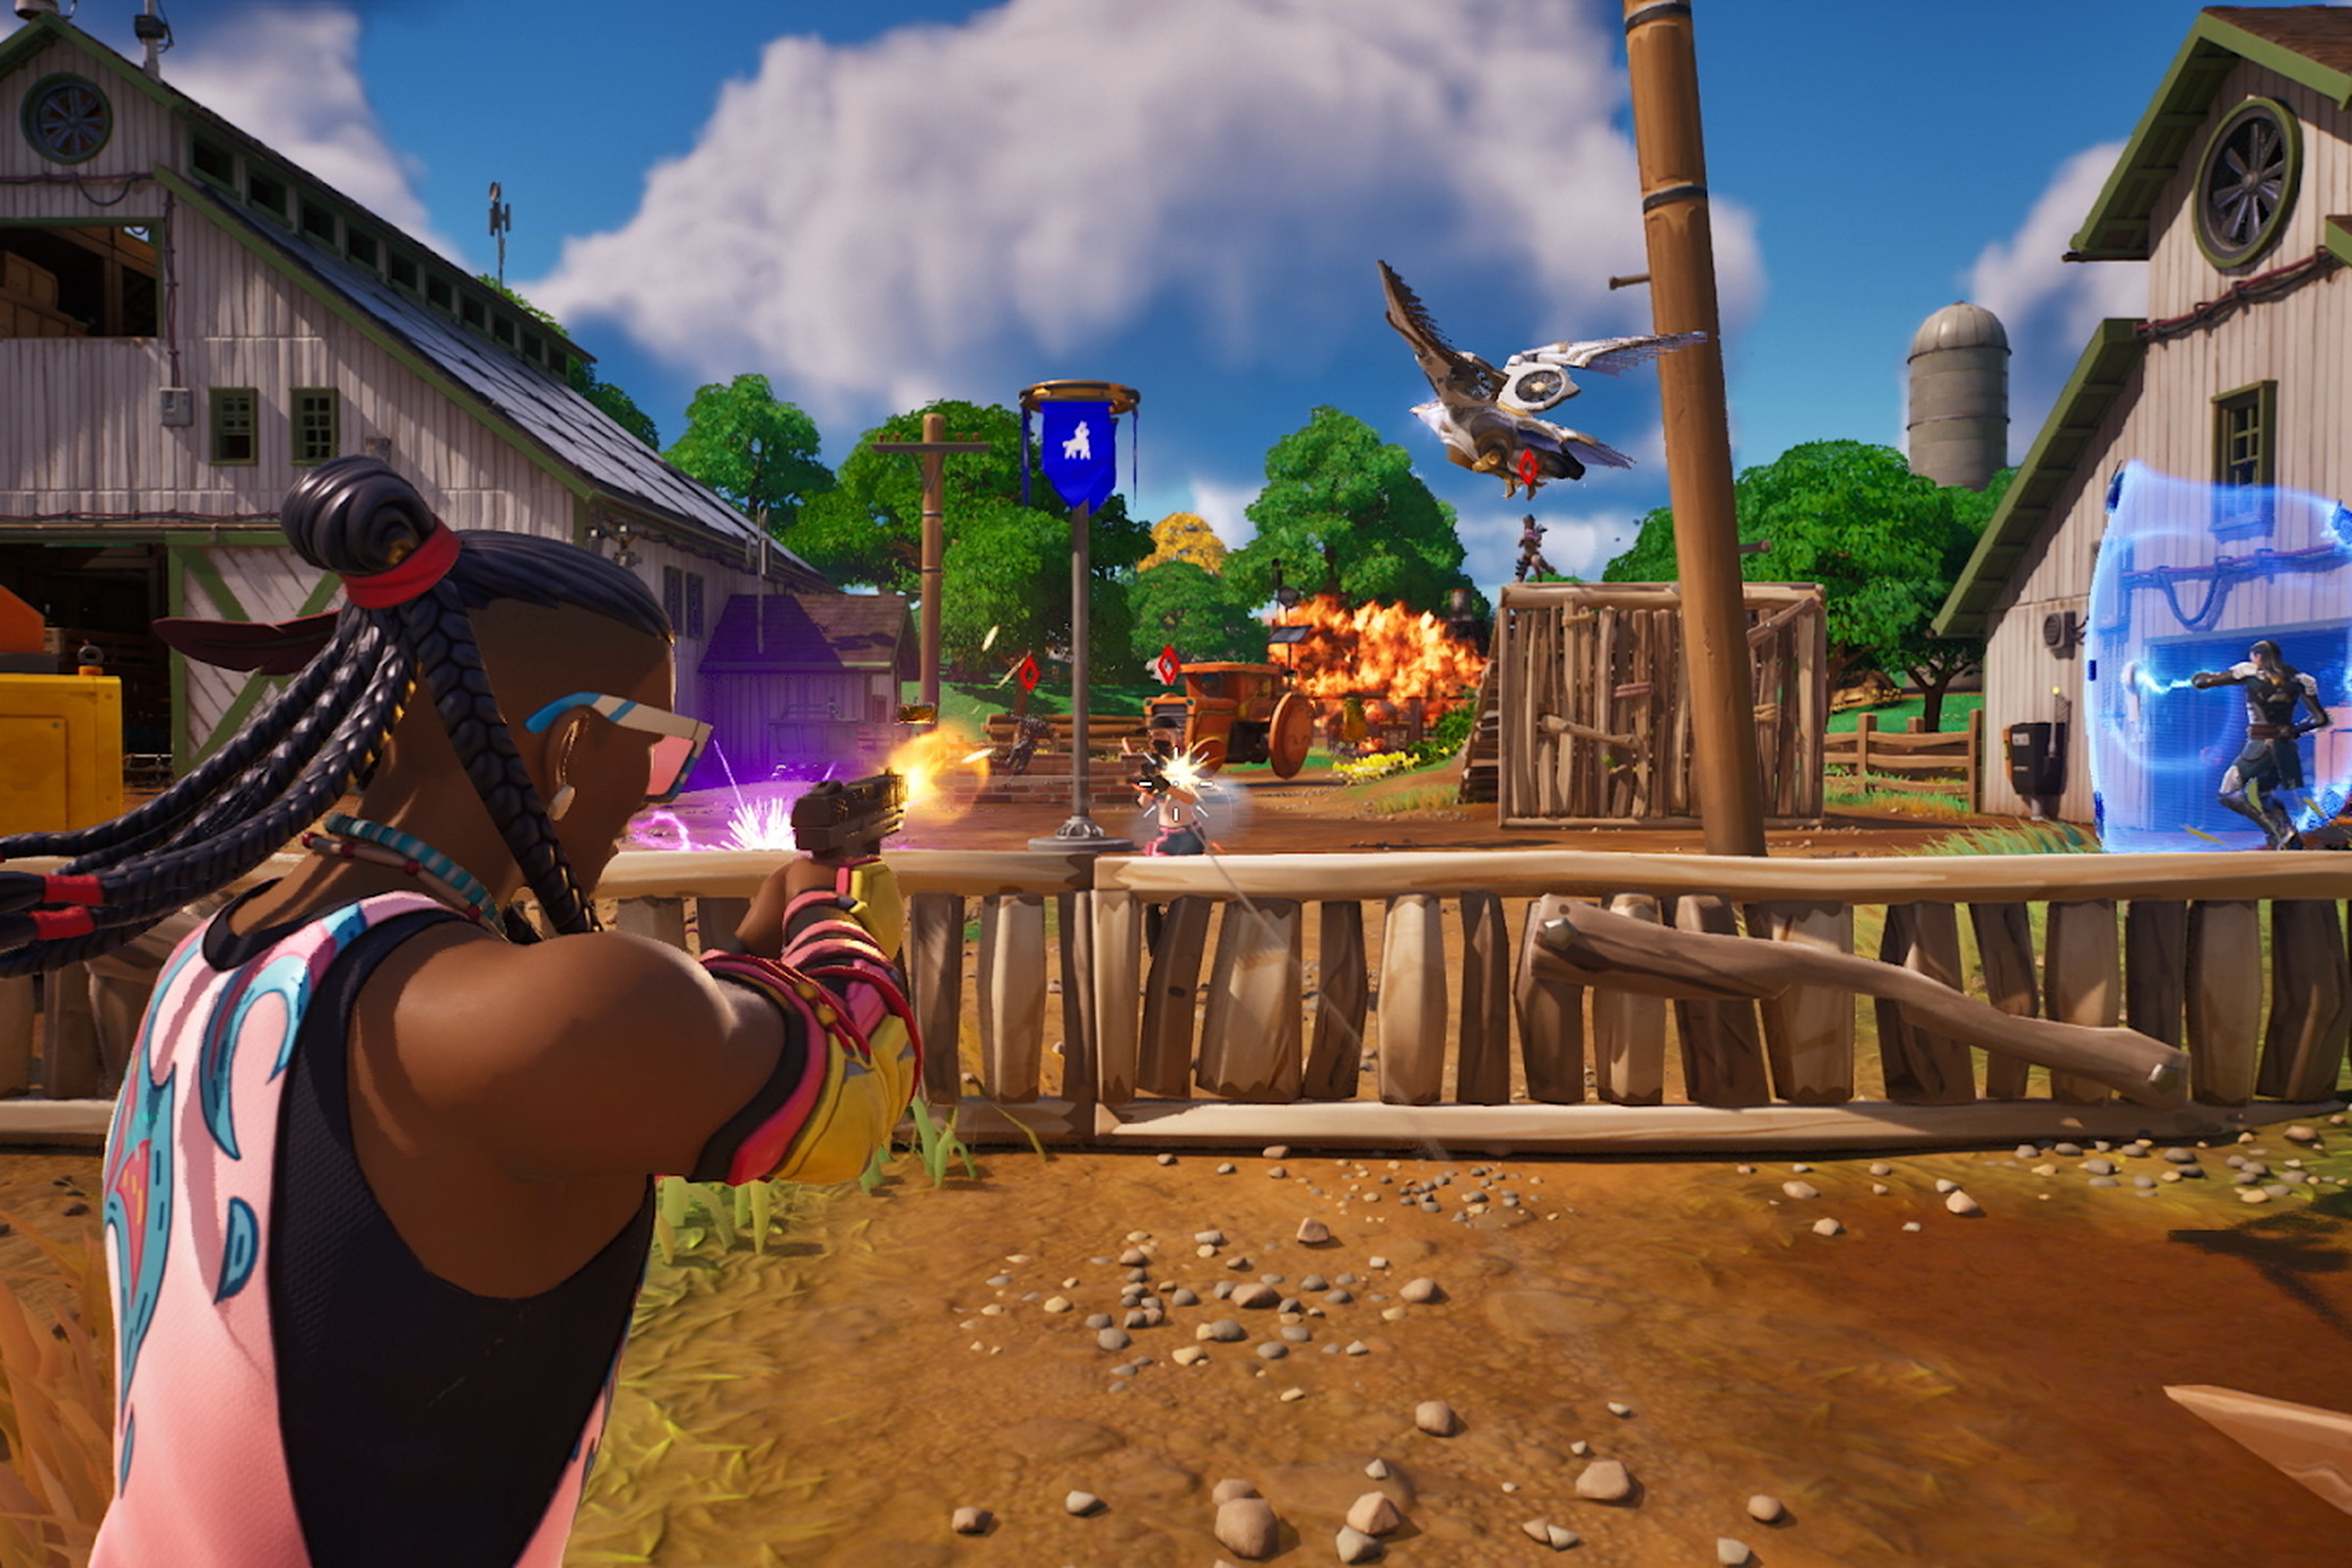 A screenshot from the video game Fortnite.